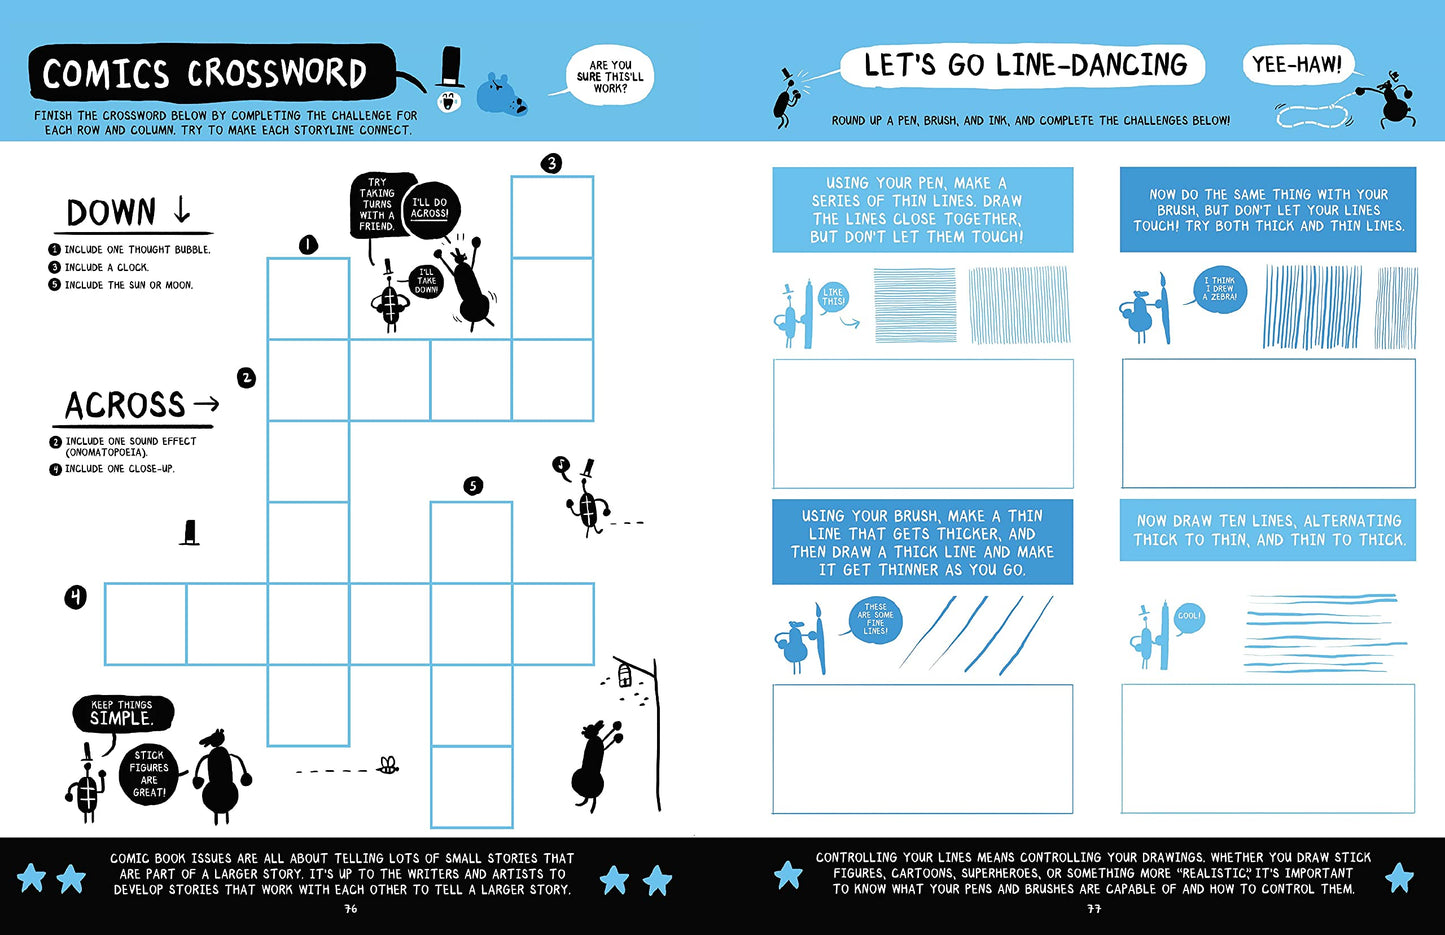 Let's Make Comics!: An Activity Book to Create, Write, and Draw Your Own Cartoons by Jess Smart Smiley